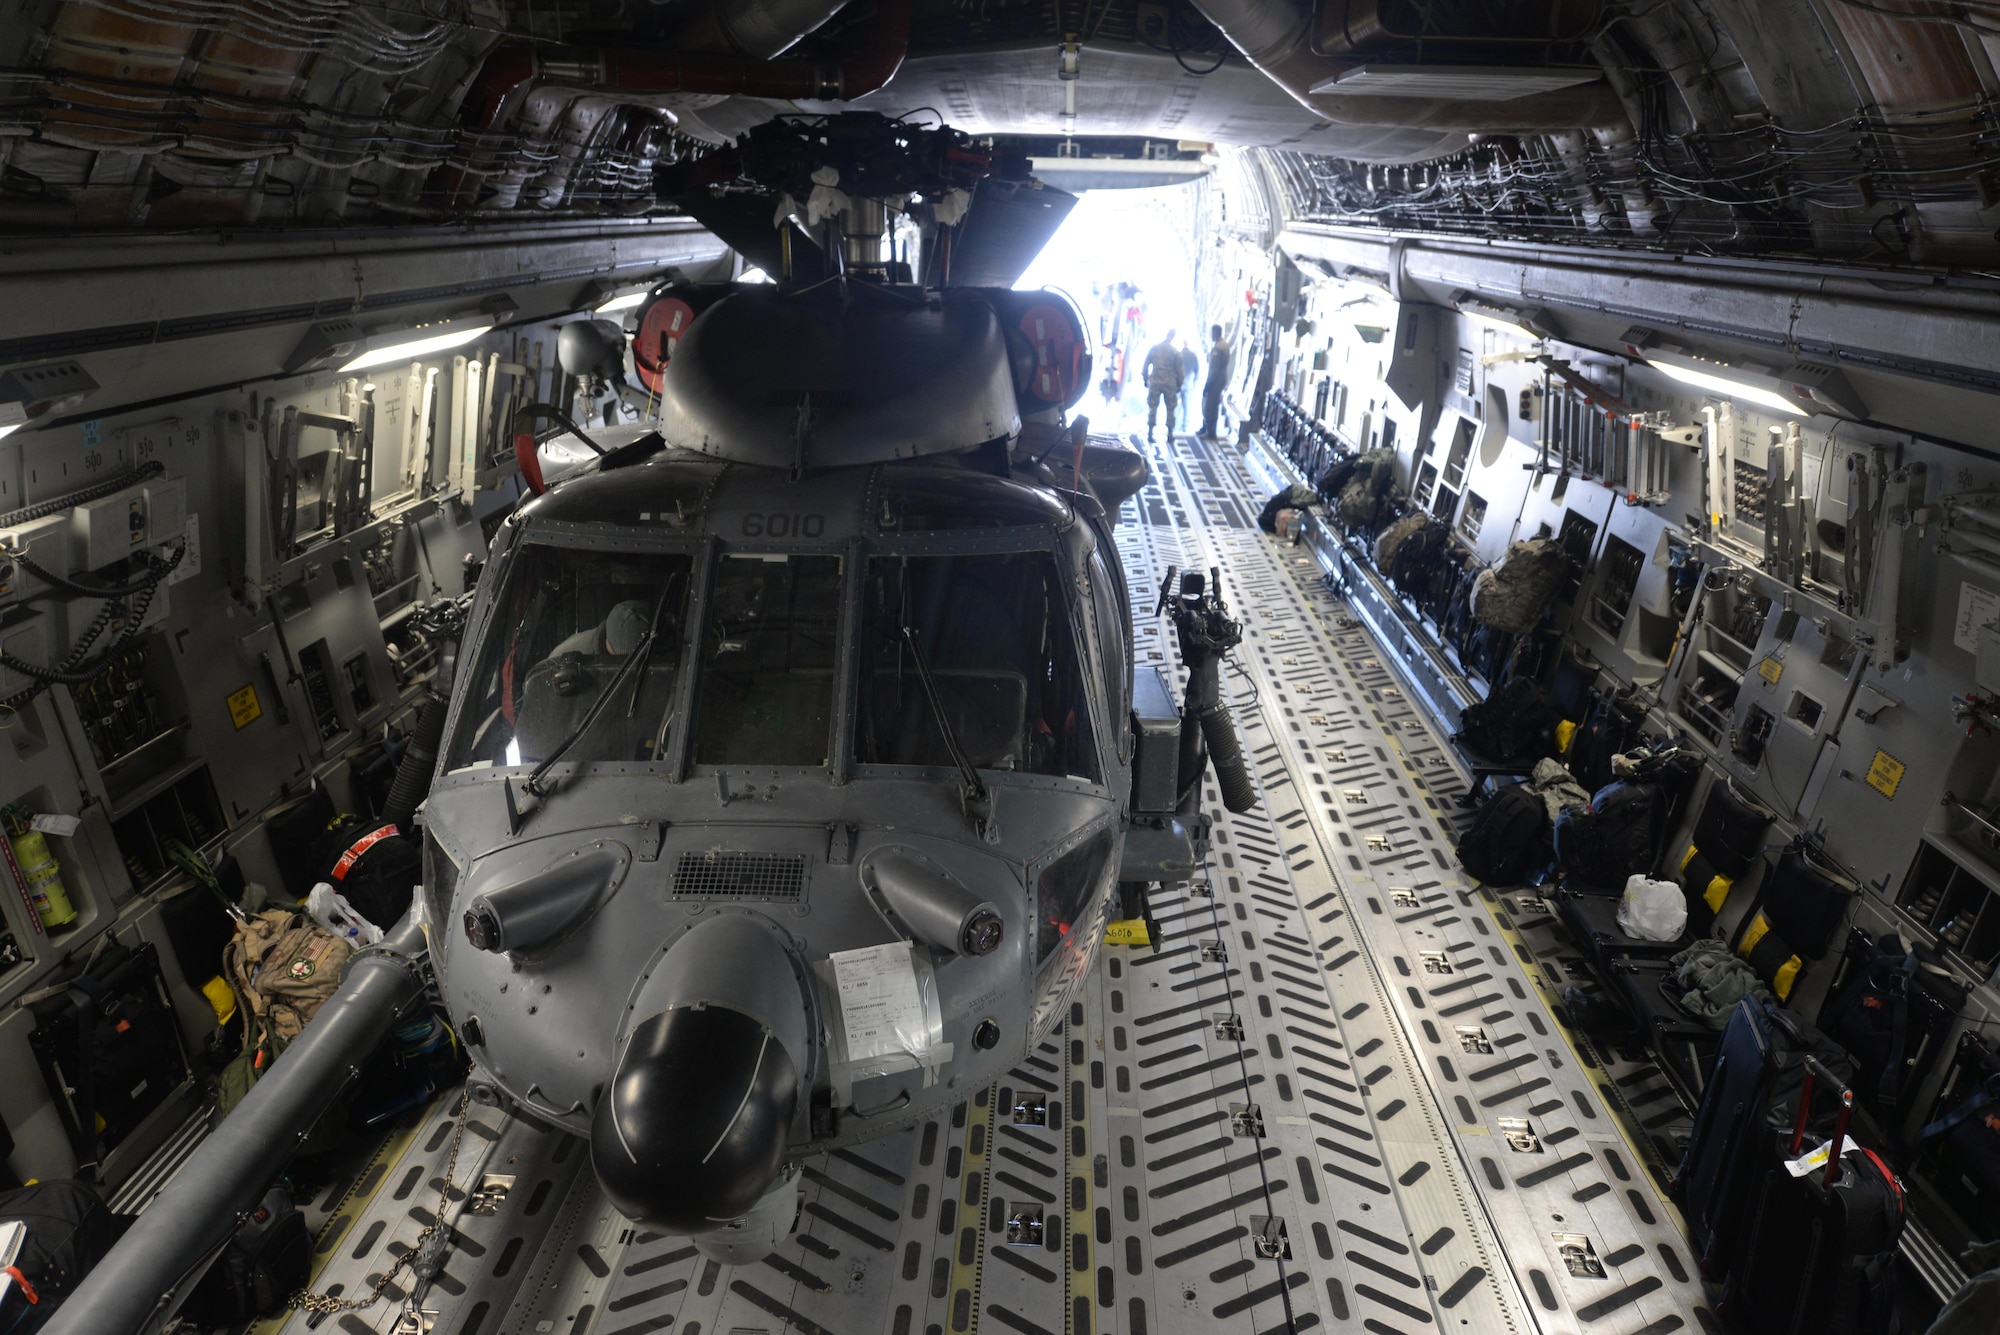 An HH-60 Pave Hawk helicopter, assigned to the 34th Weapons Squadron, sits inside a C-17 Globemaster III, assigned to the 57th Weapons Squadron, McChord Air Force Base, Wash., at Nellis Air Force Base, Nev., March 28, 2017. The HH-60 is the primary search-and-rescue helicopter for the Air Force, and can also be tasked with disaster and humanitarian relief missions. (U.S. Air Force photo by Airman 1st Class Andrew D. Sarver/ Released)